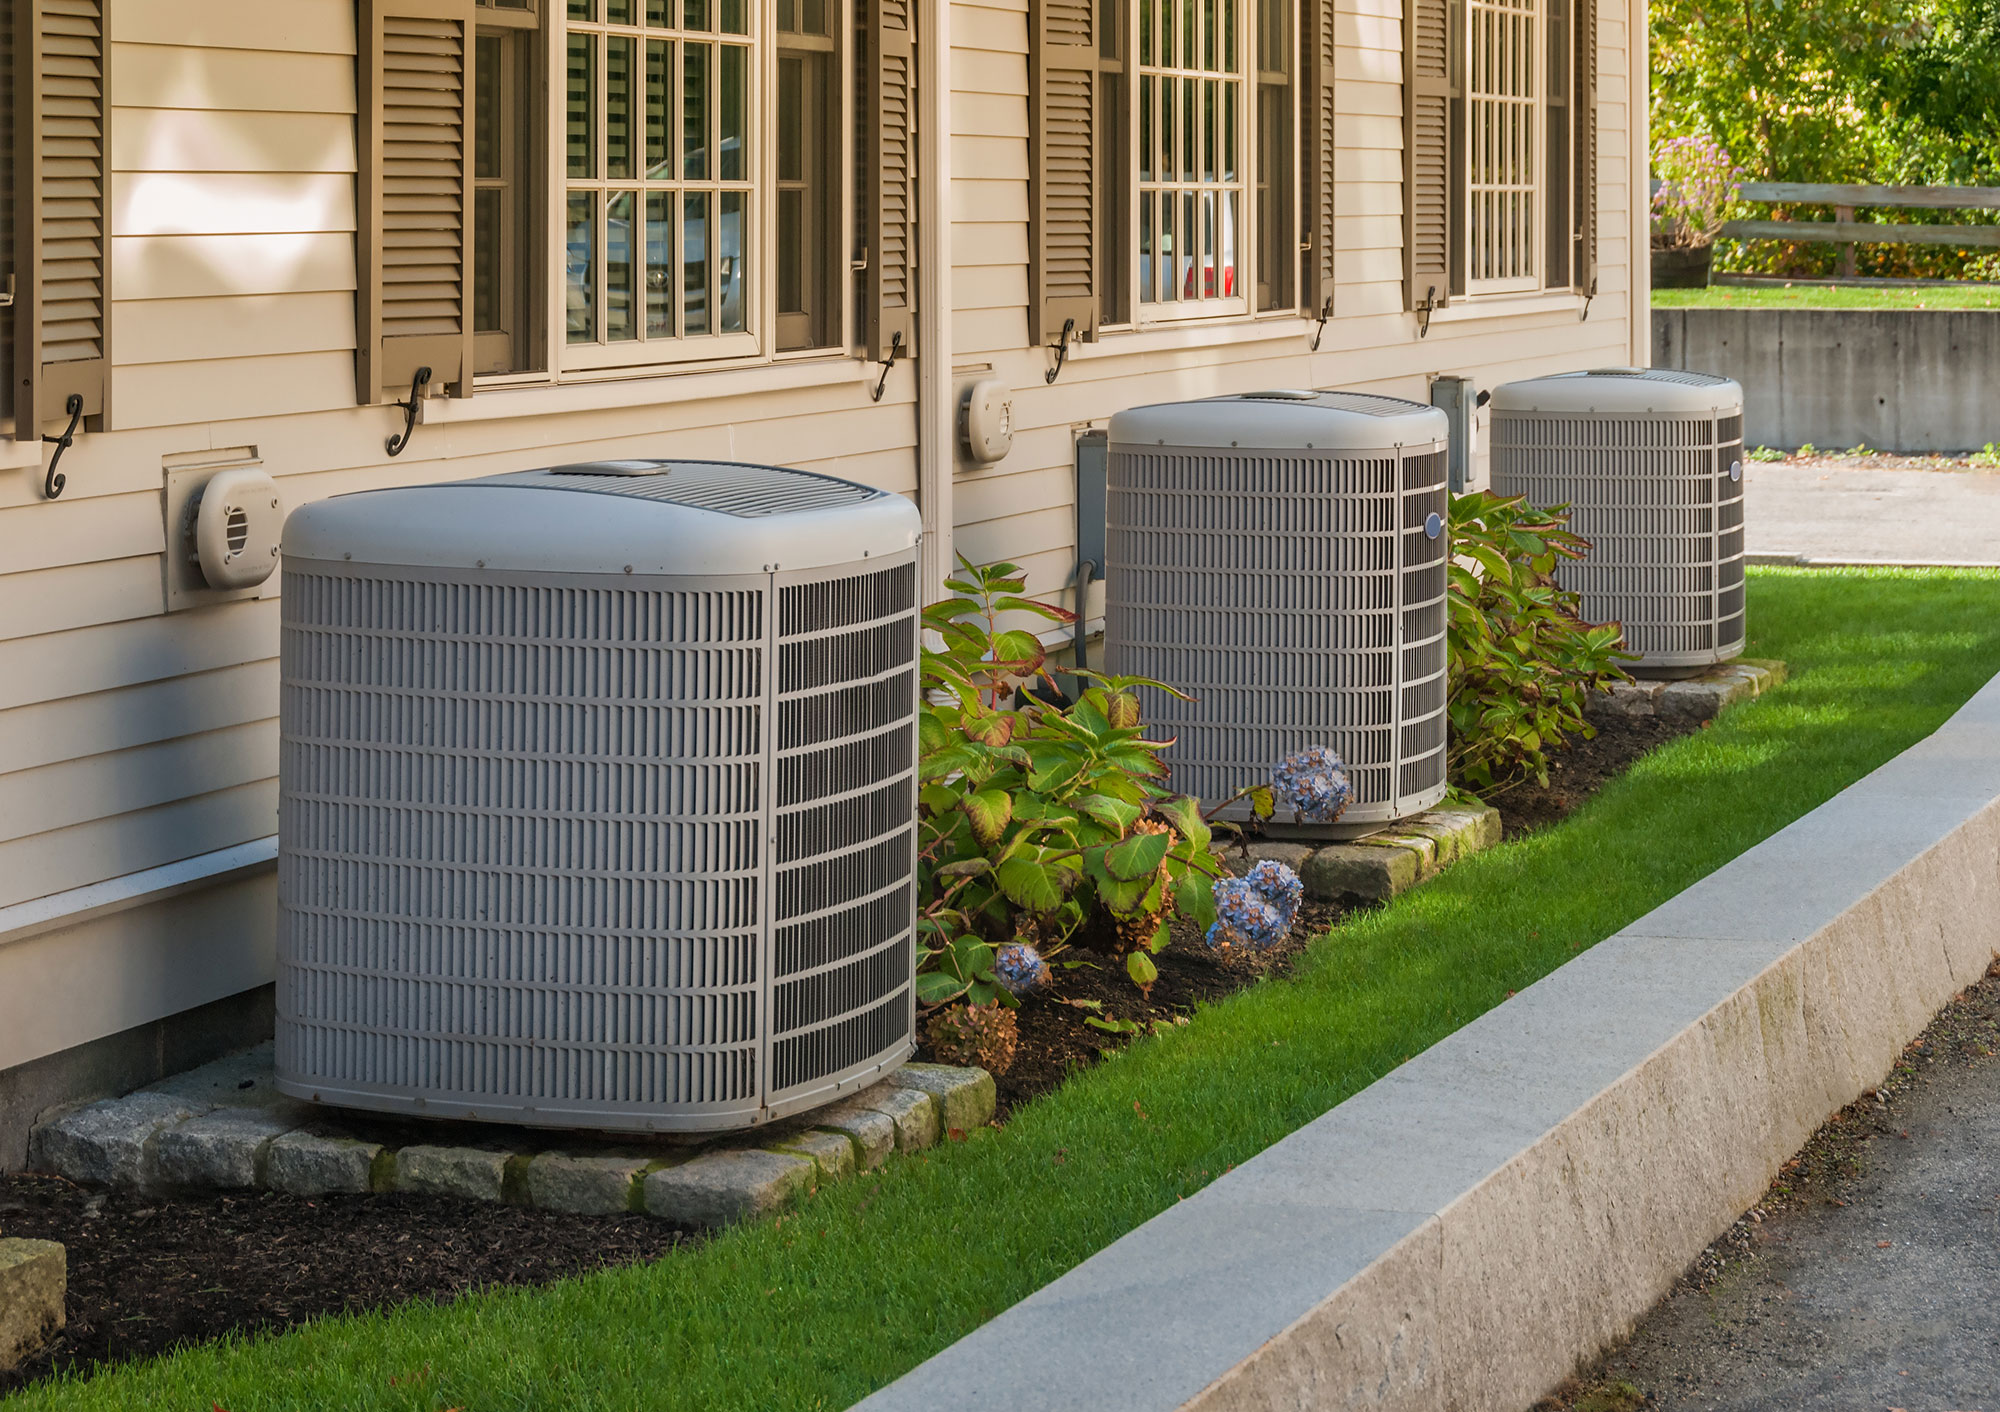 Residential air conditioning units outside house.